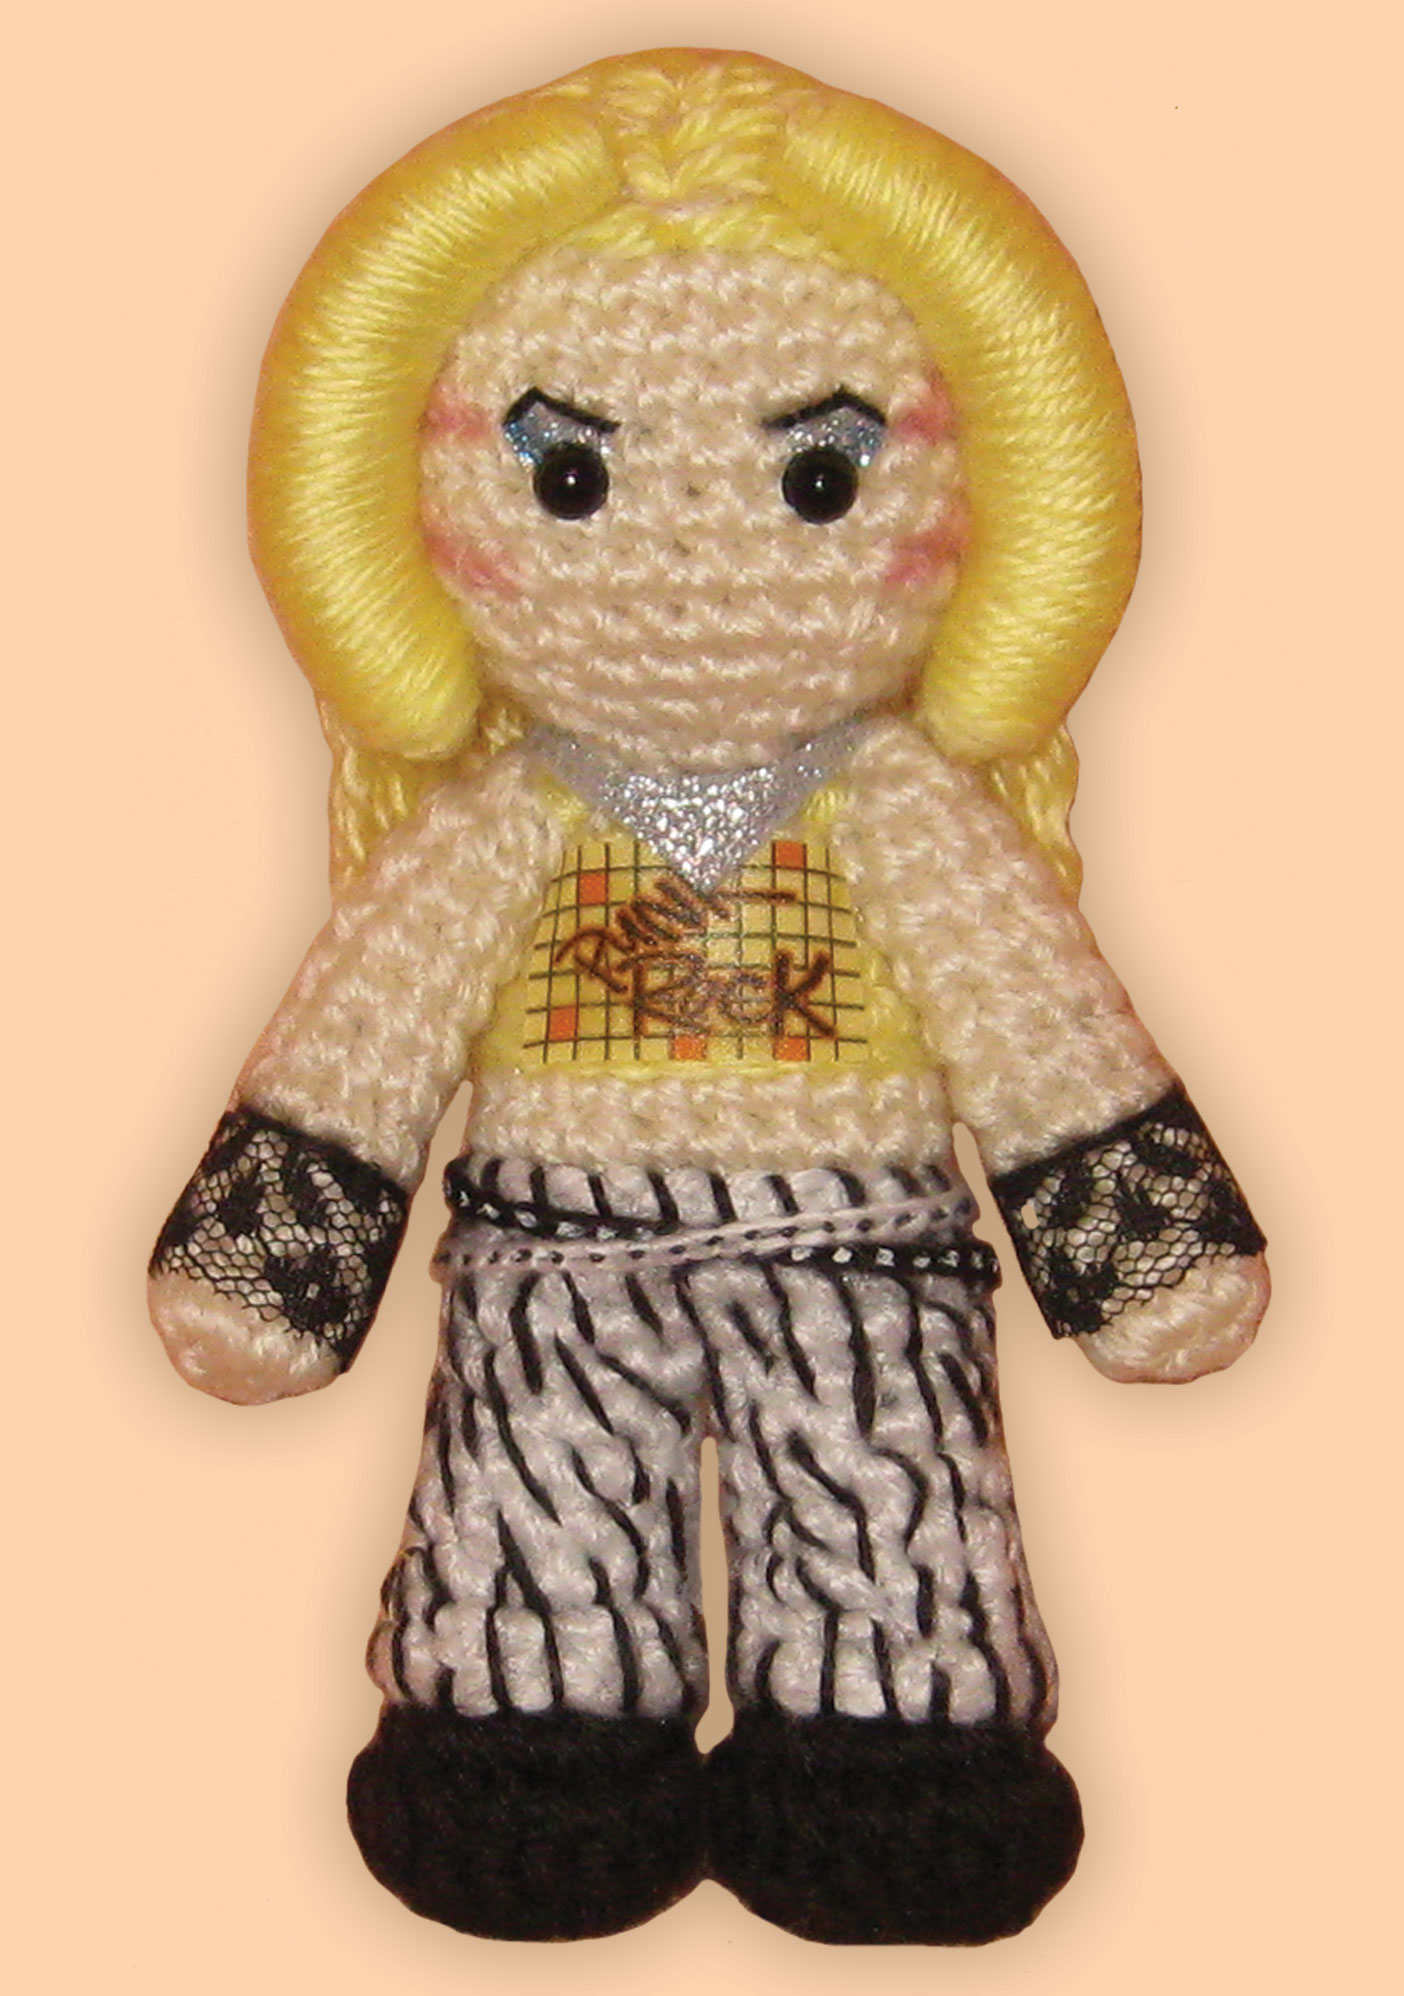 Crocheted doll amigurumi Punk Rock Hedwig from Hedwig and the Angry Inch